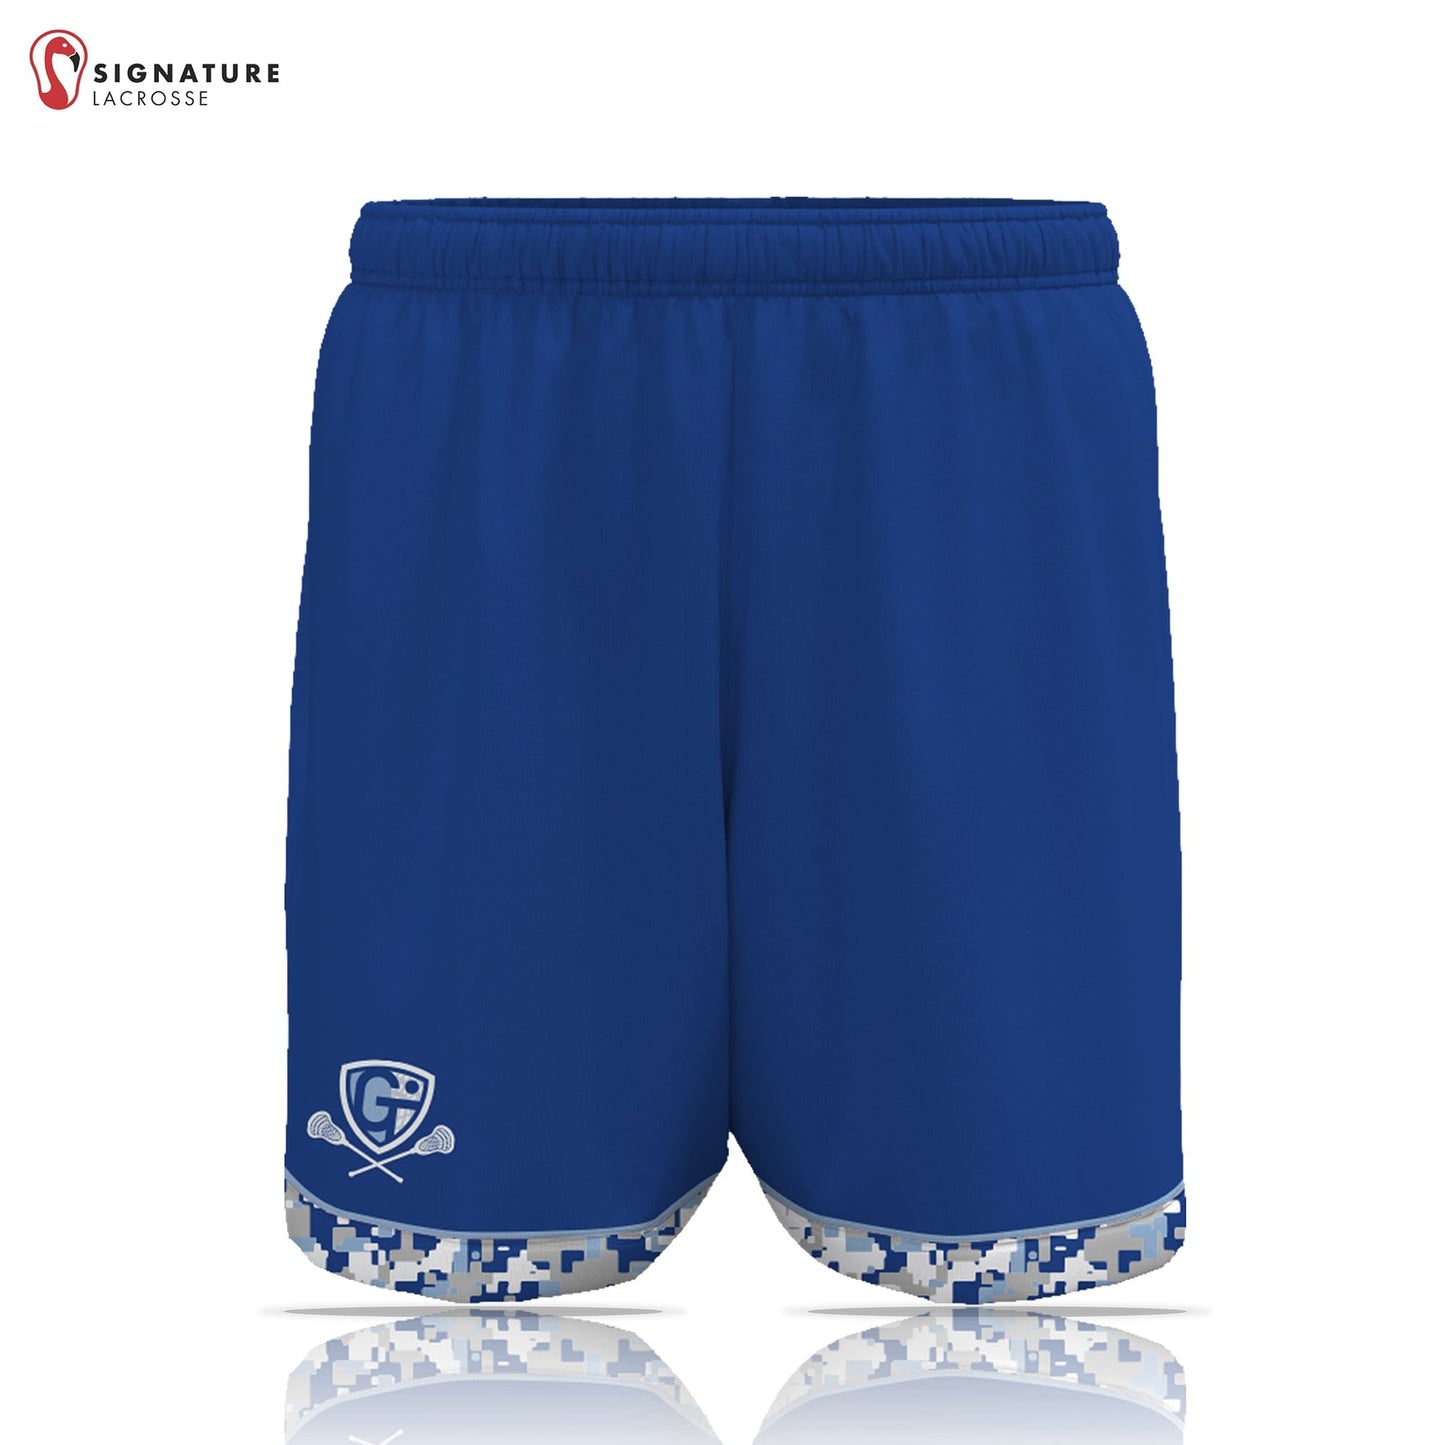 Georgetown-Triton Youth Lacrosse Men's Player Game Shorts: 1-2 Signature Lacrosse